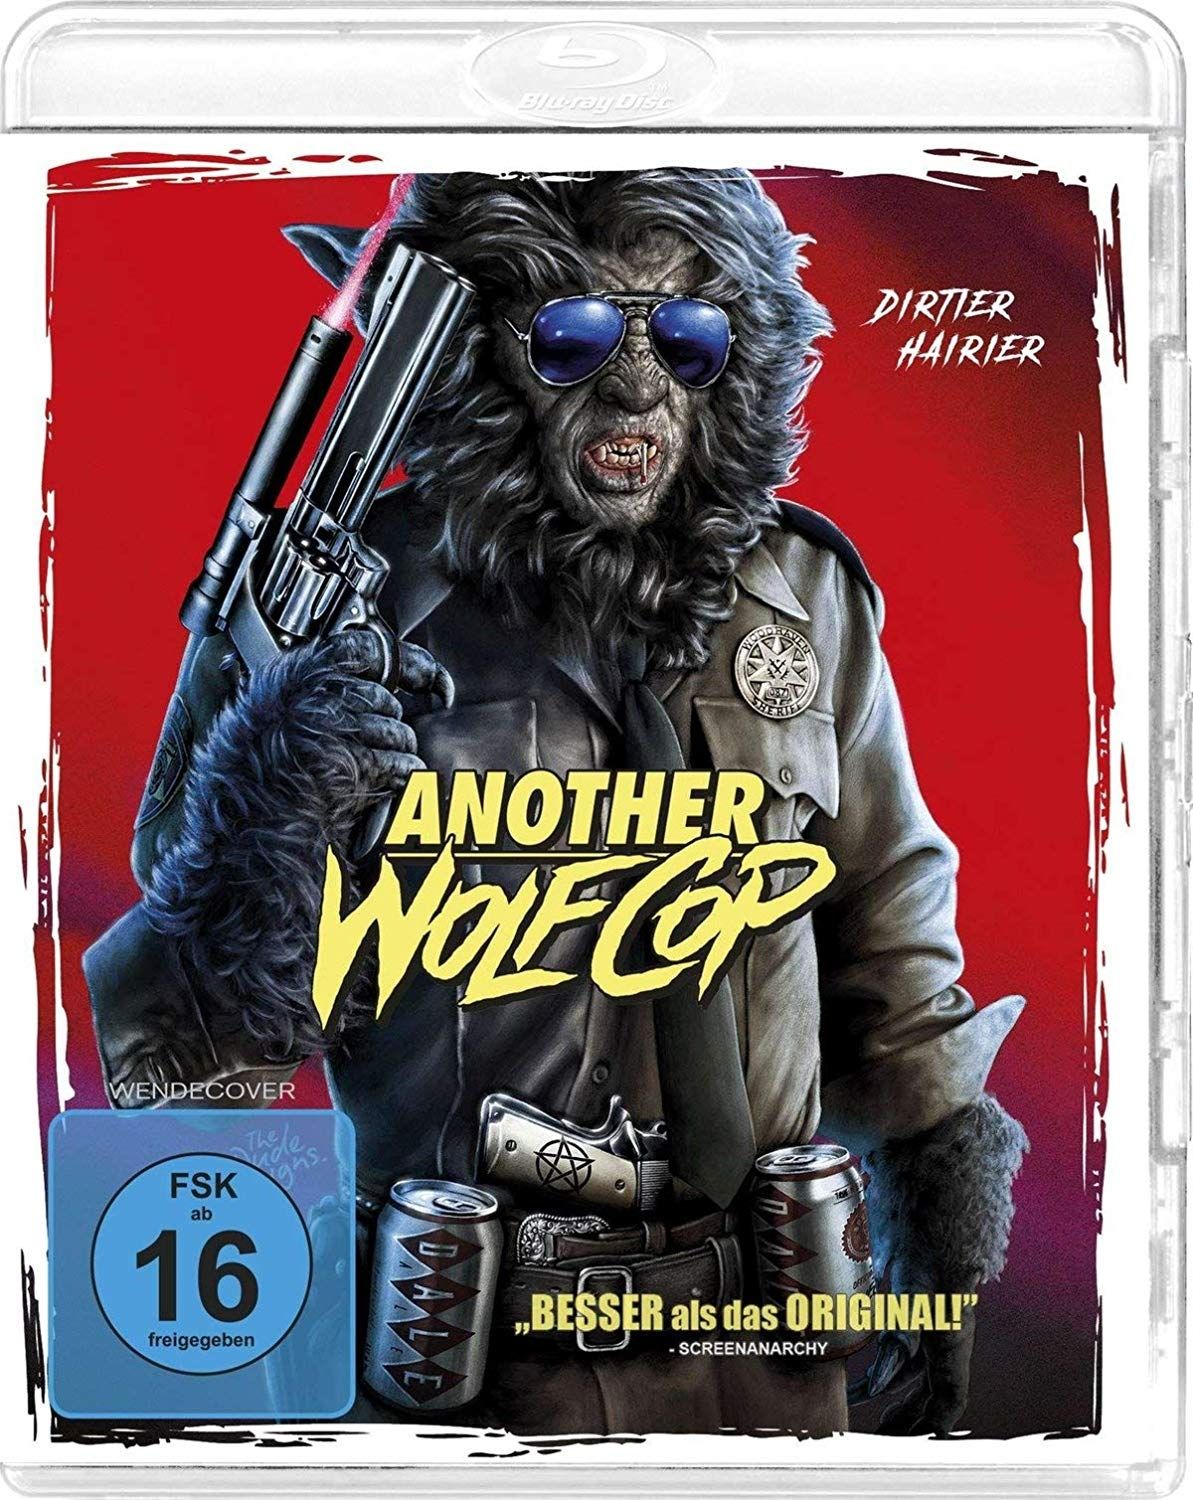 Another WolfCop (BLURAY)